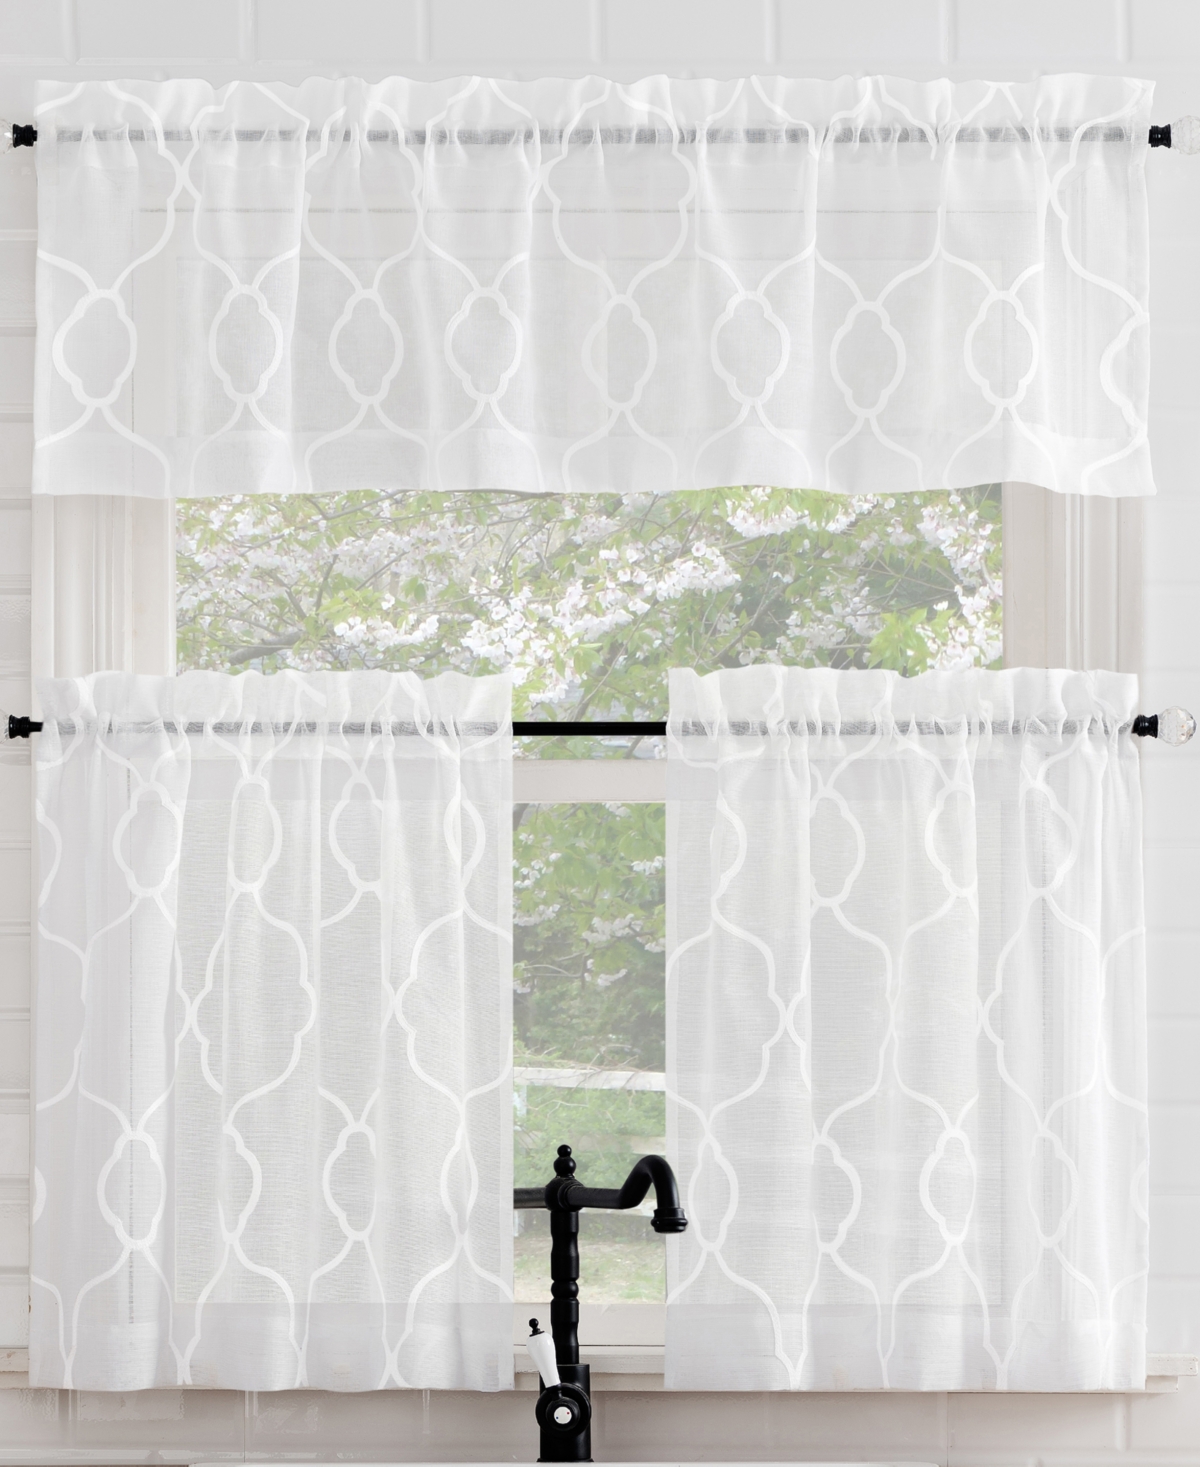 NO. 918 ALLERTON EMBROIDERED TRELLIS LIGHT FILTERING ROD POCKET 3-PC. CURTAIN VALANCE AND TIERS, 52" X 24"